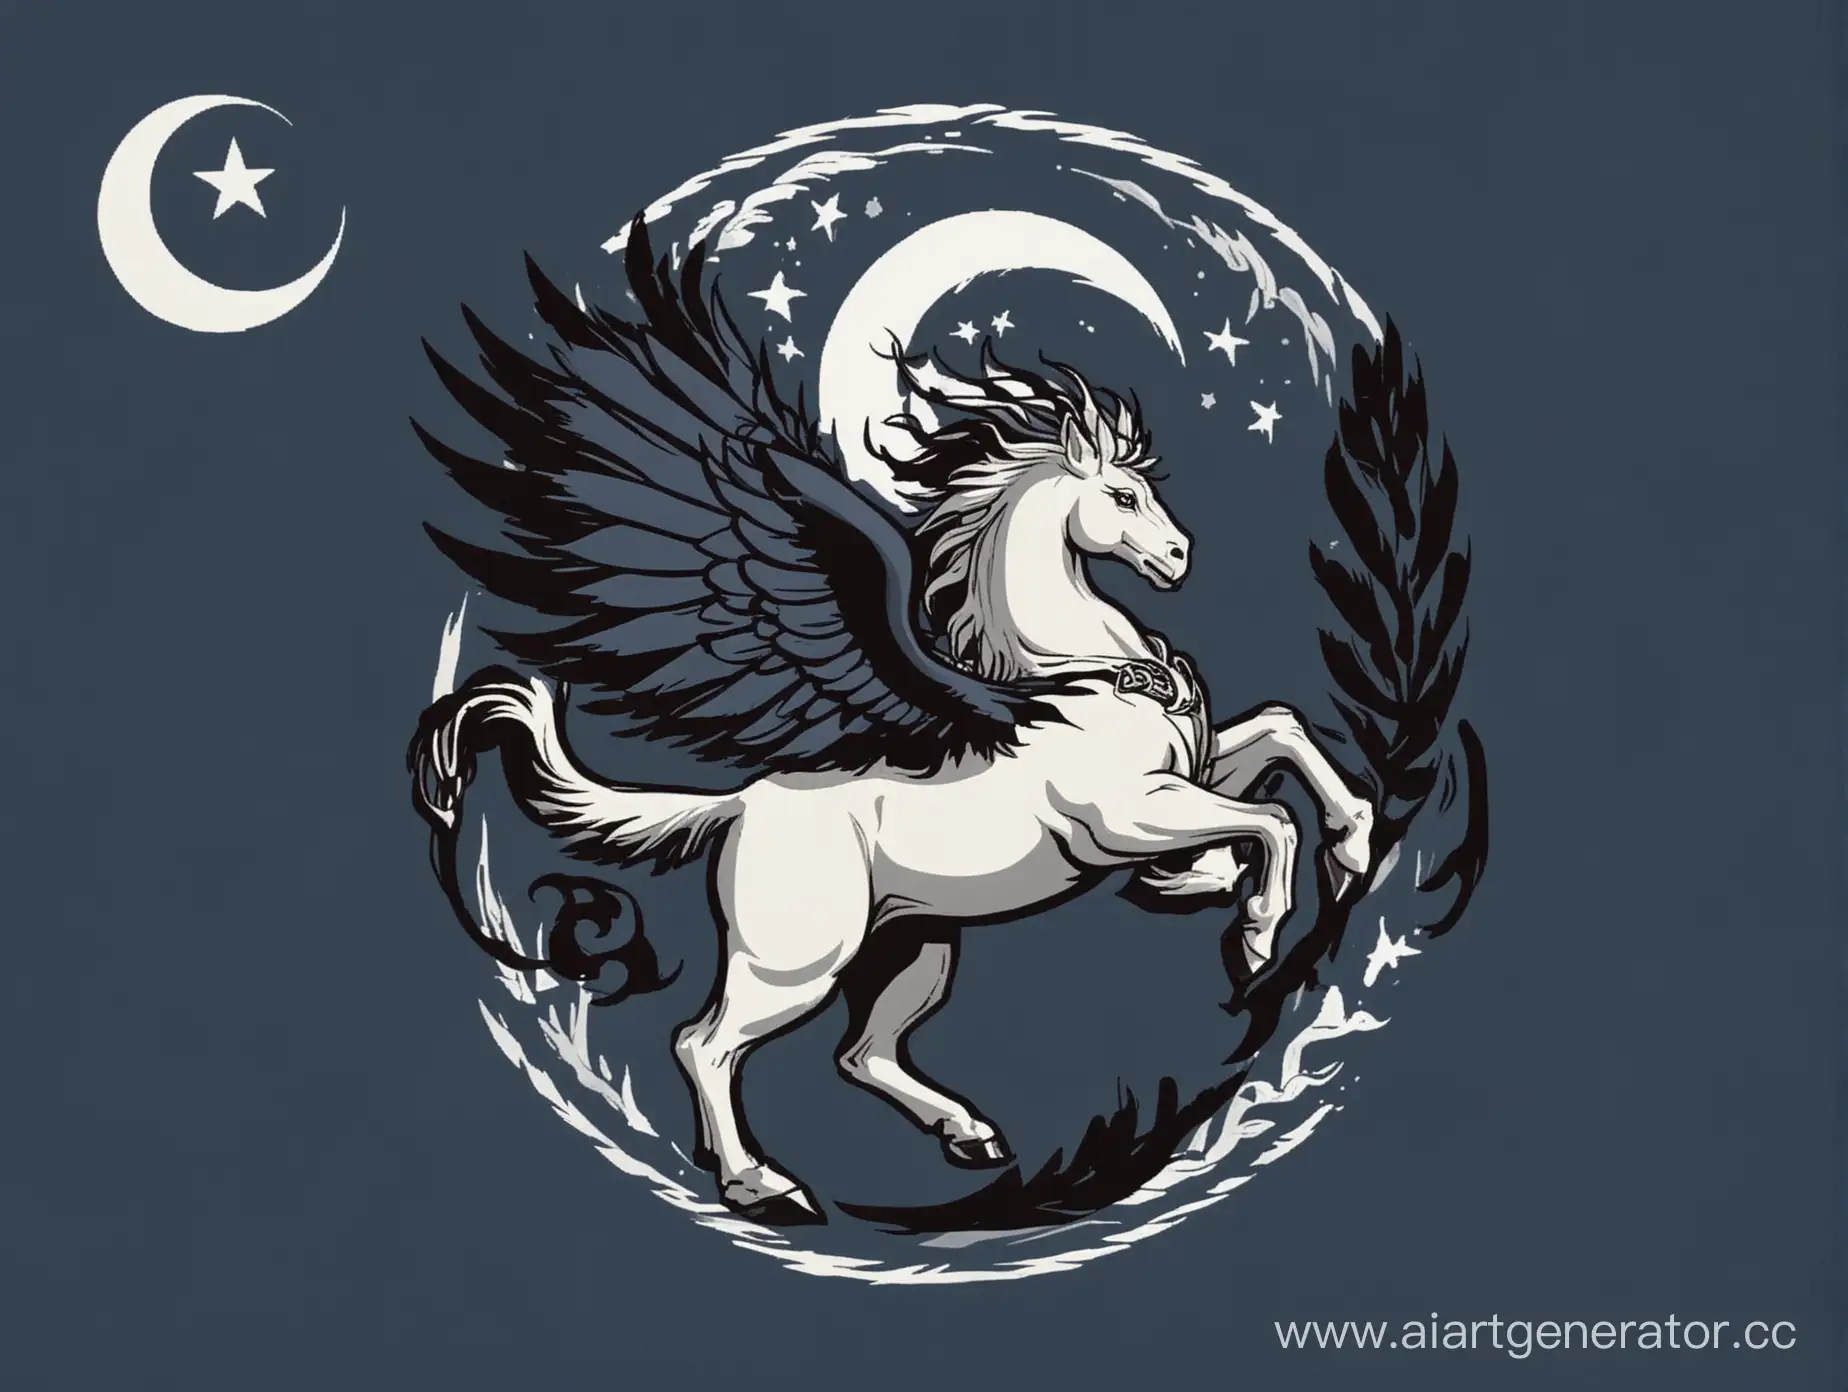 State-of-Hippogriffs-Flag-Lunar-Empire-Protectorate-in-Moonlight